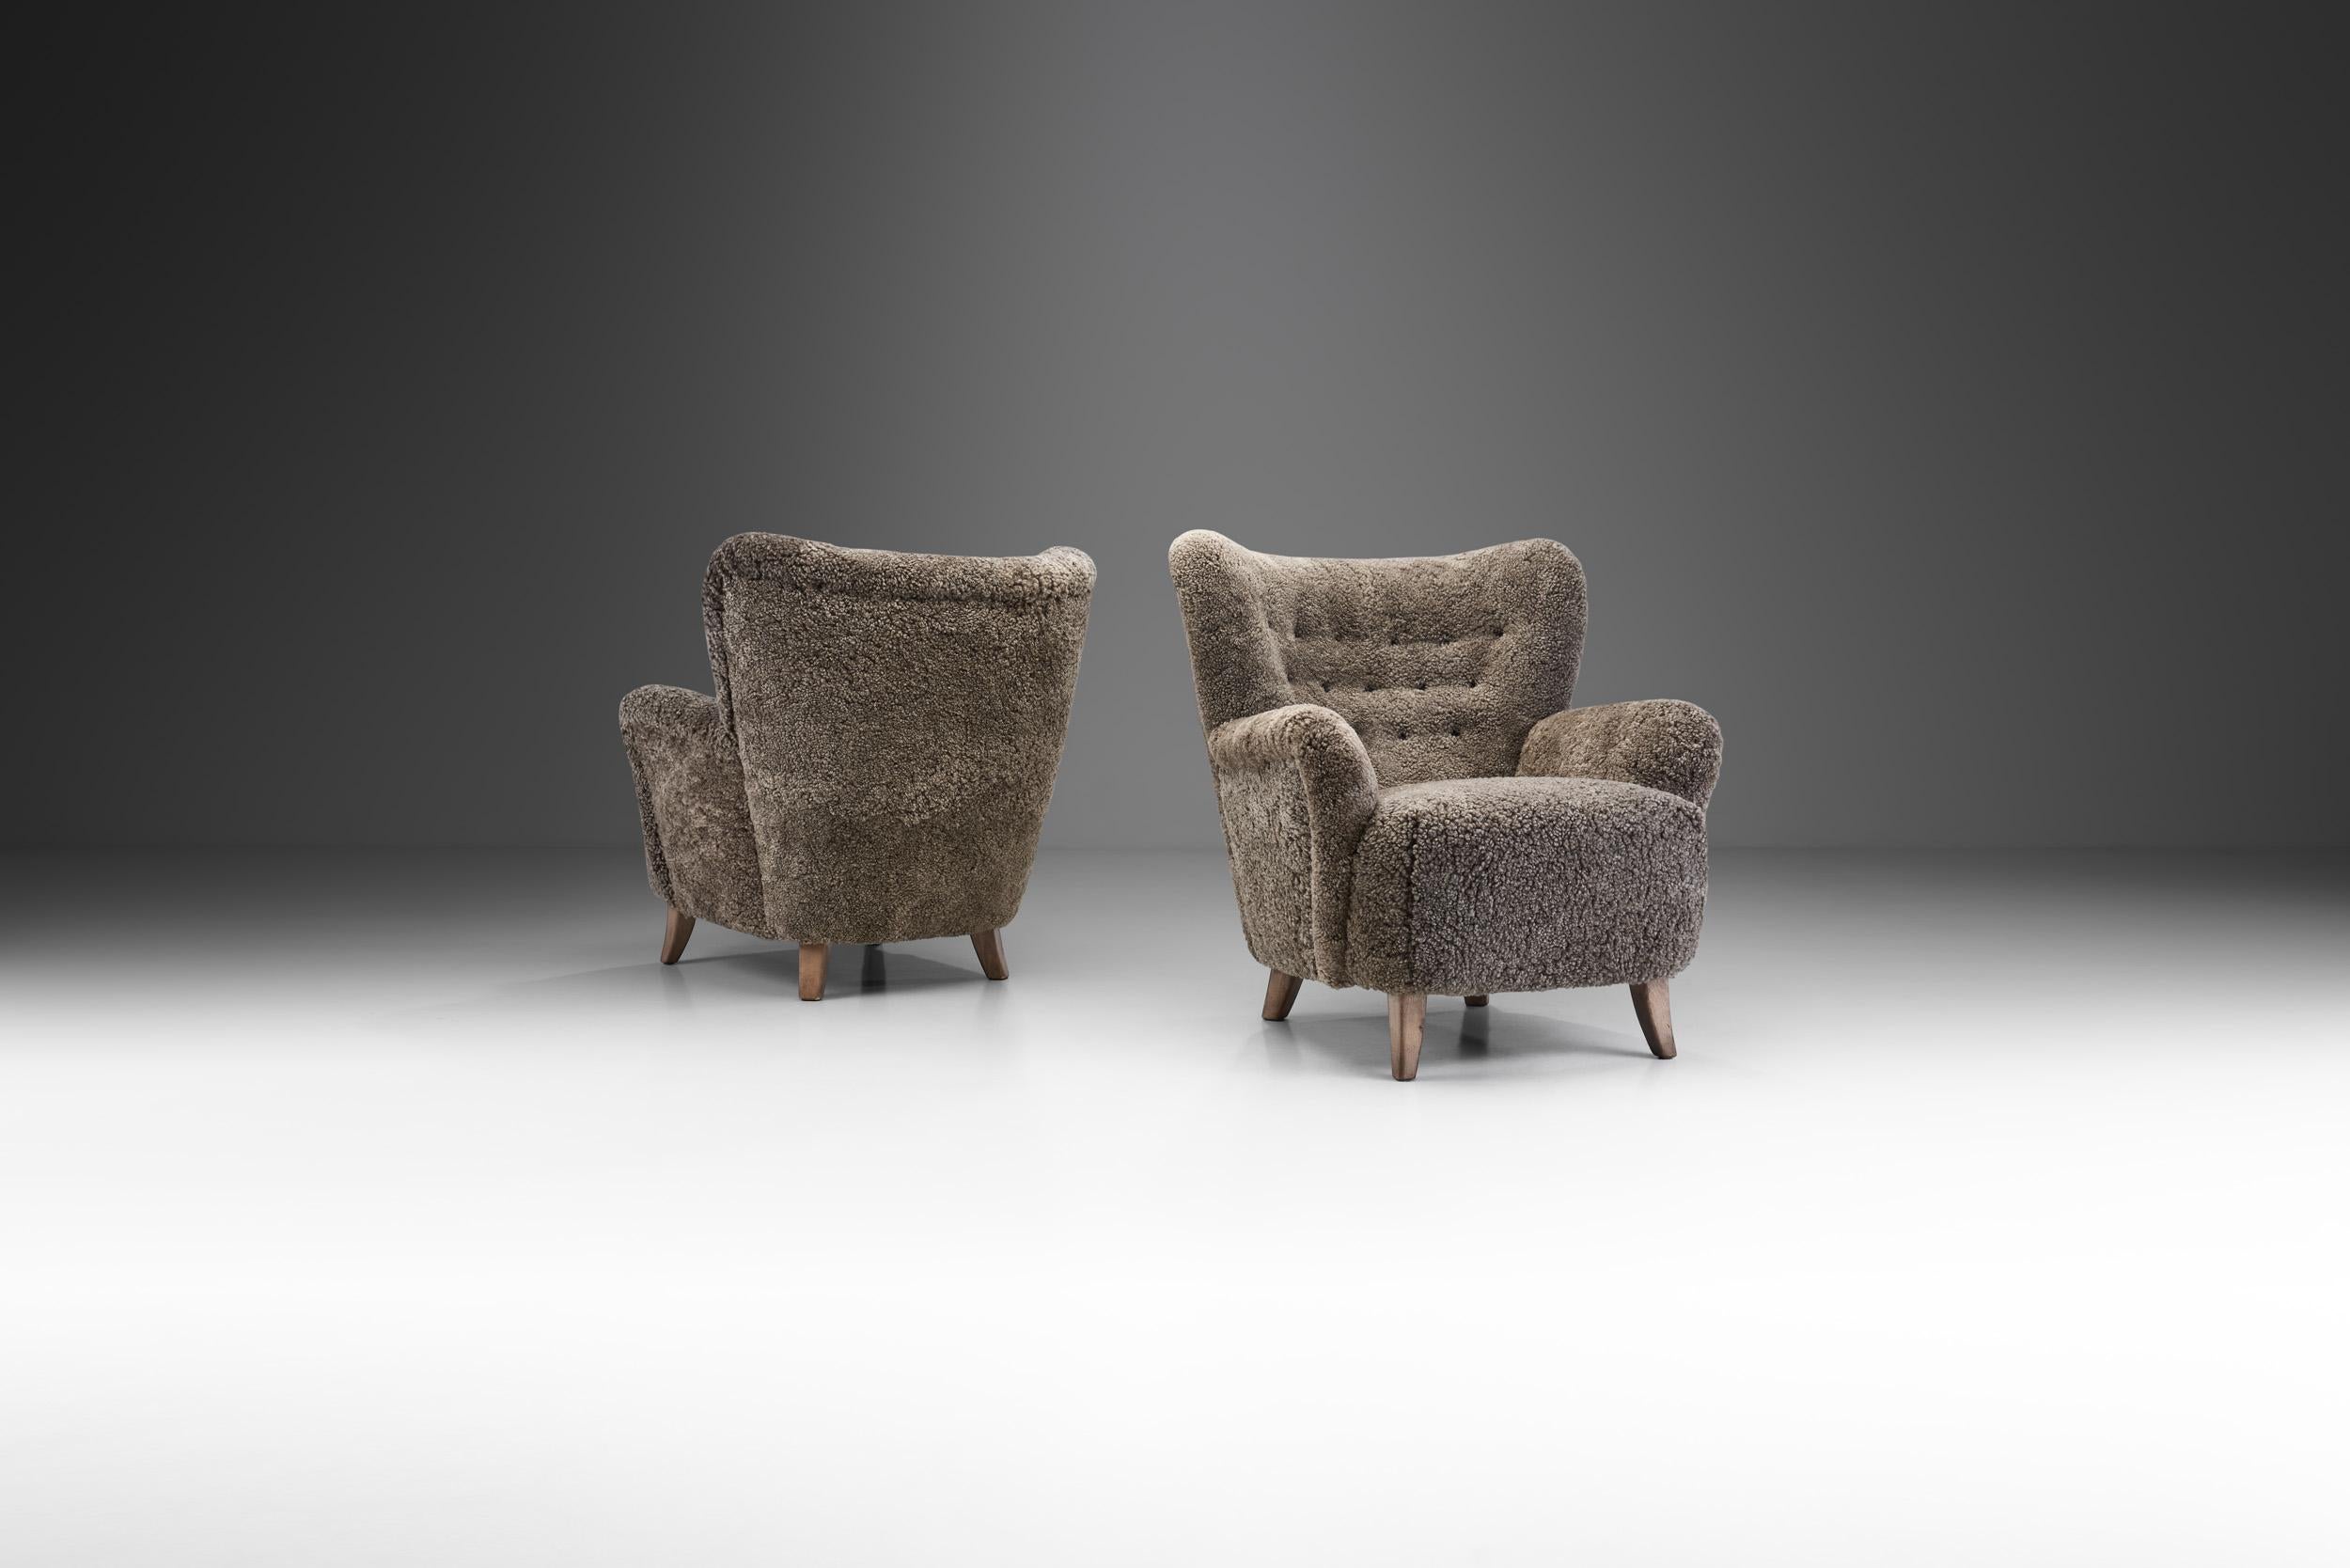 The “Laila” model by the Finnish designer Ilmari Lappalainen originates from 1948, with the earliest original drawings kept in the Lahti City Museum in their Lappalainen Collection.

This pair of “nr. 238” armchairs are from the Finnish designer’s